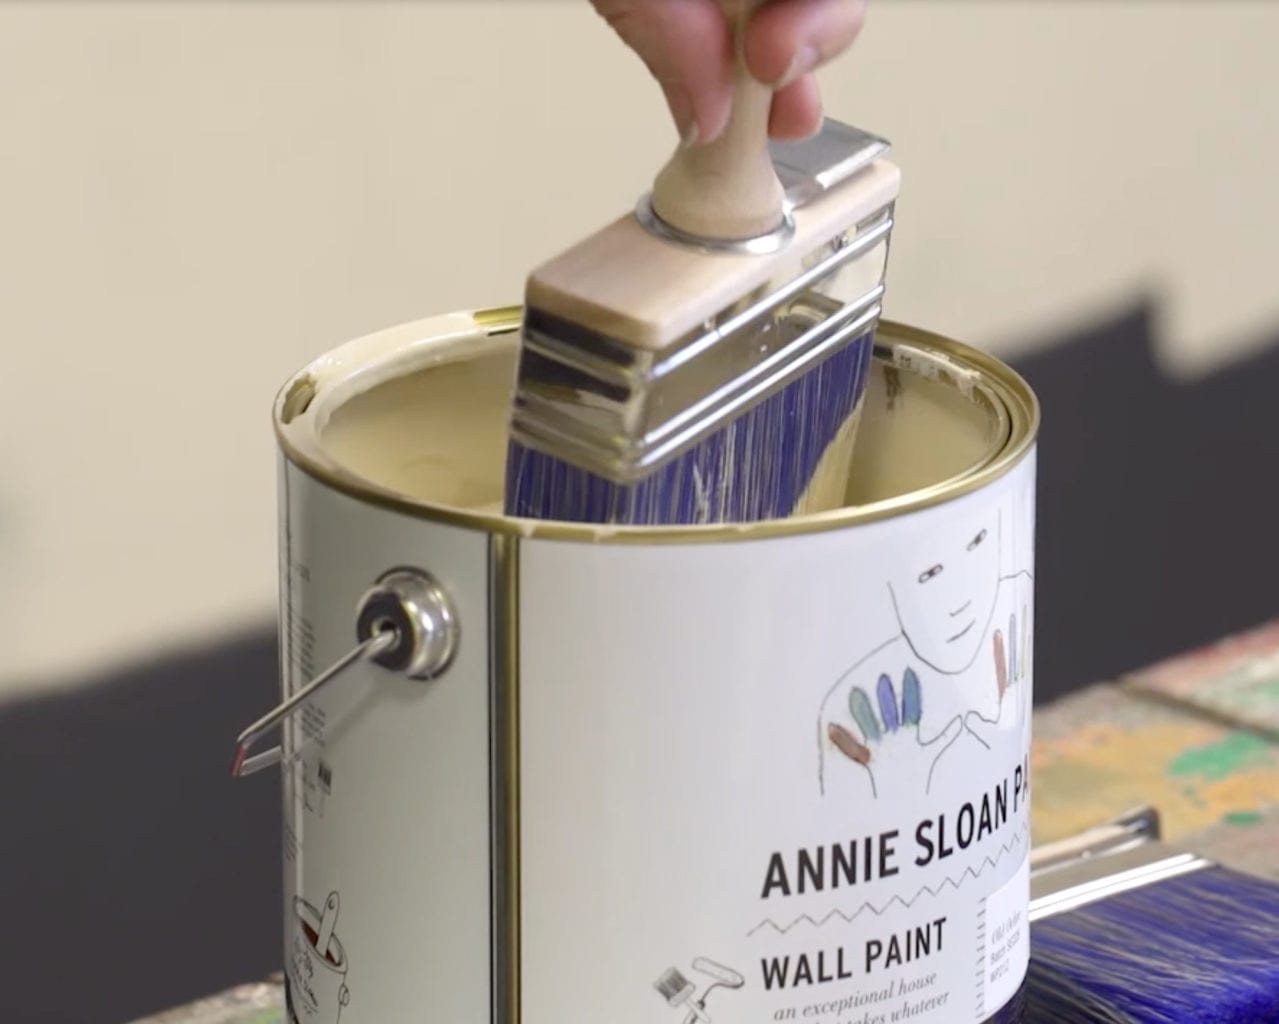 Annie Sloan Wall Paint Brush in Wall Paint in Original tin